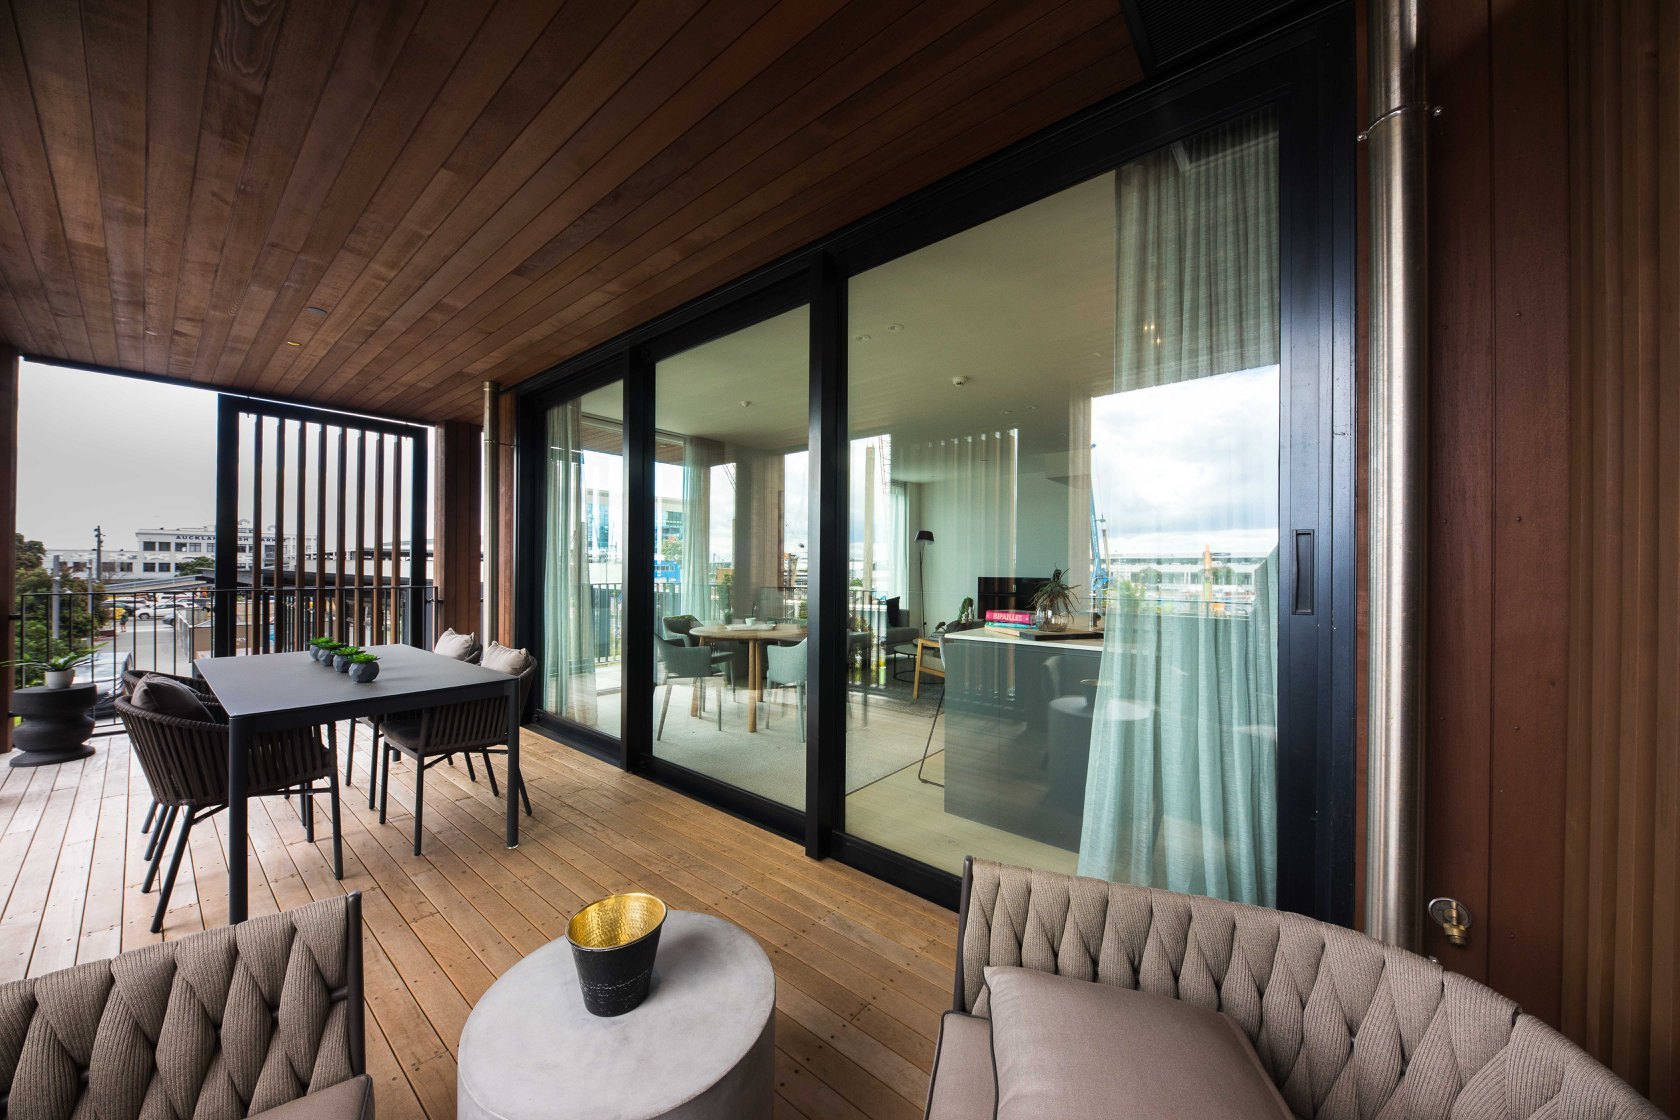 Stylish urban apartments with wooden exterior and deck area, featuring sleek black-framed windows